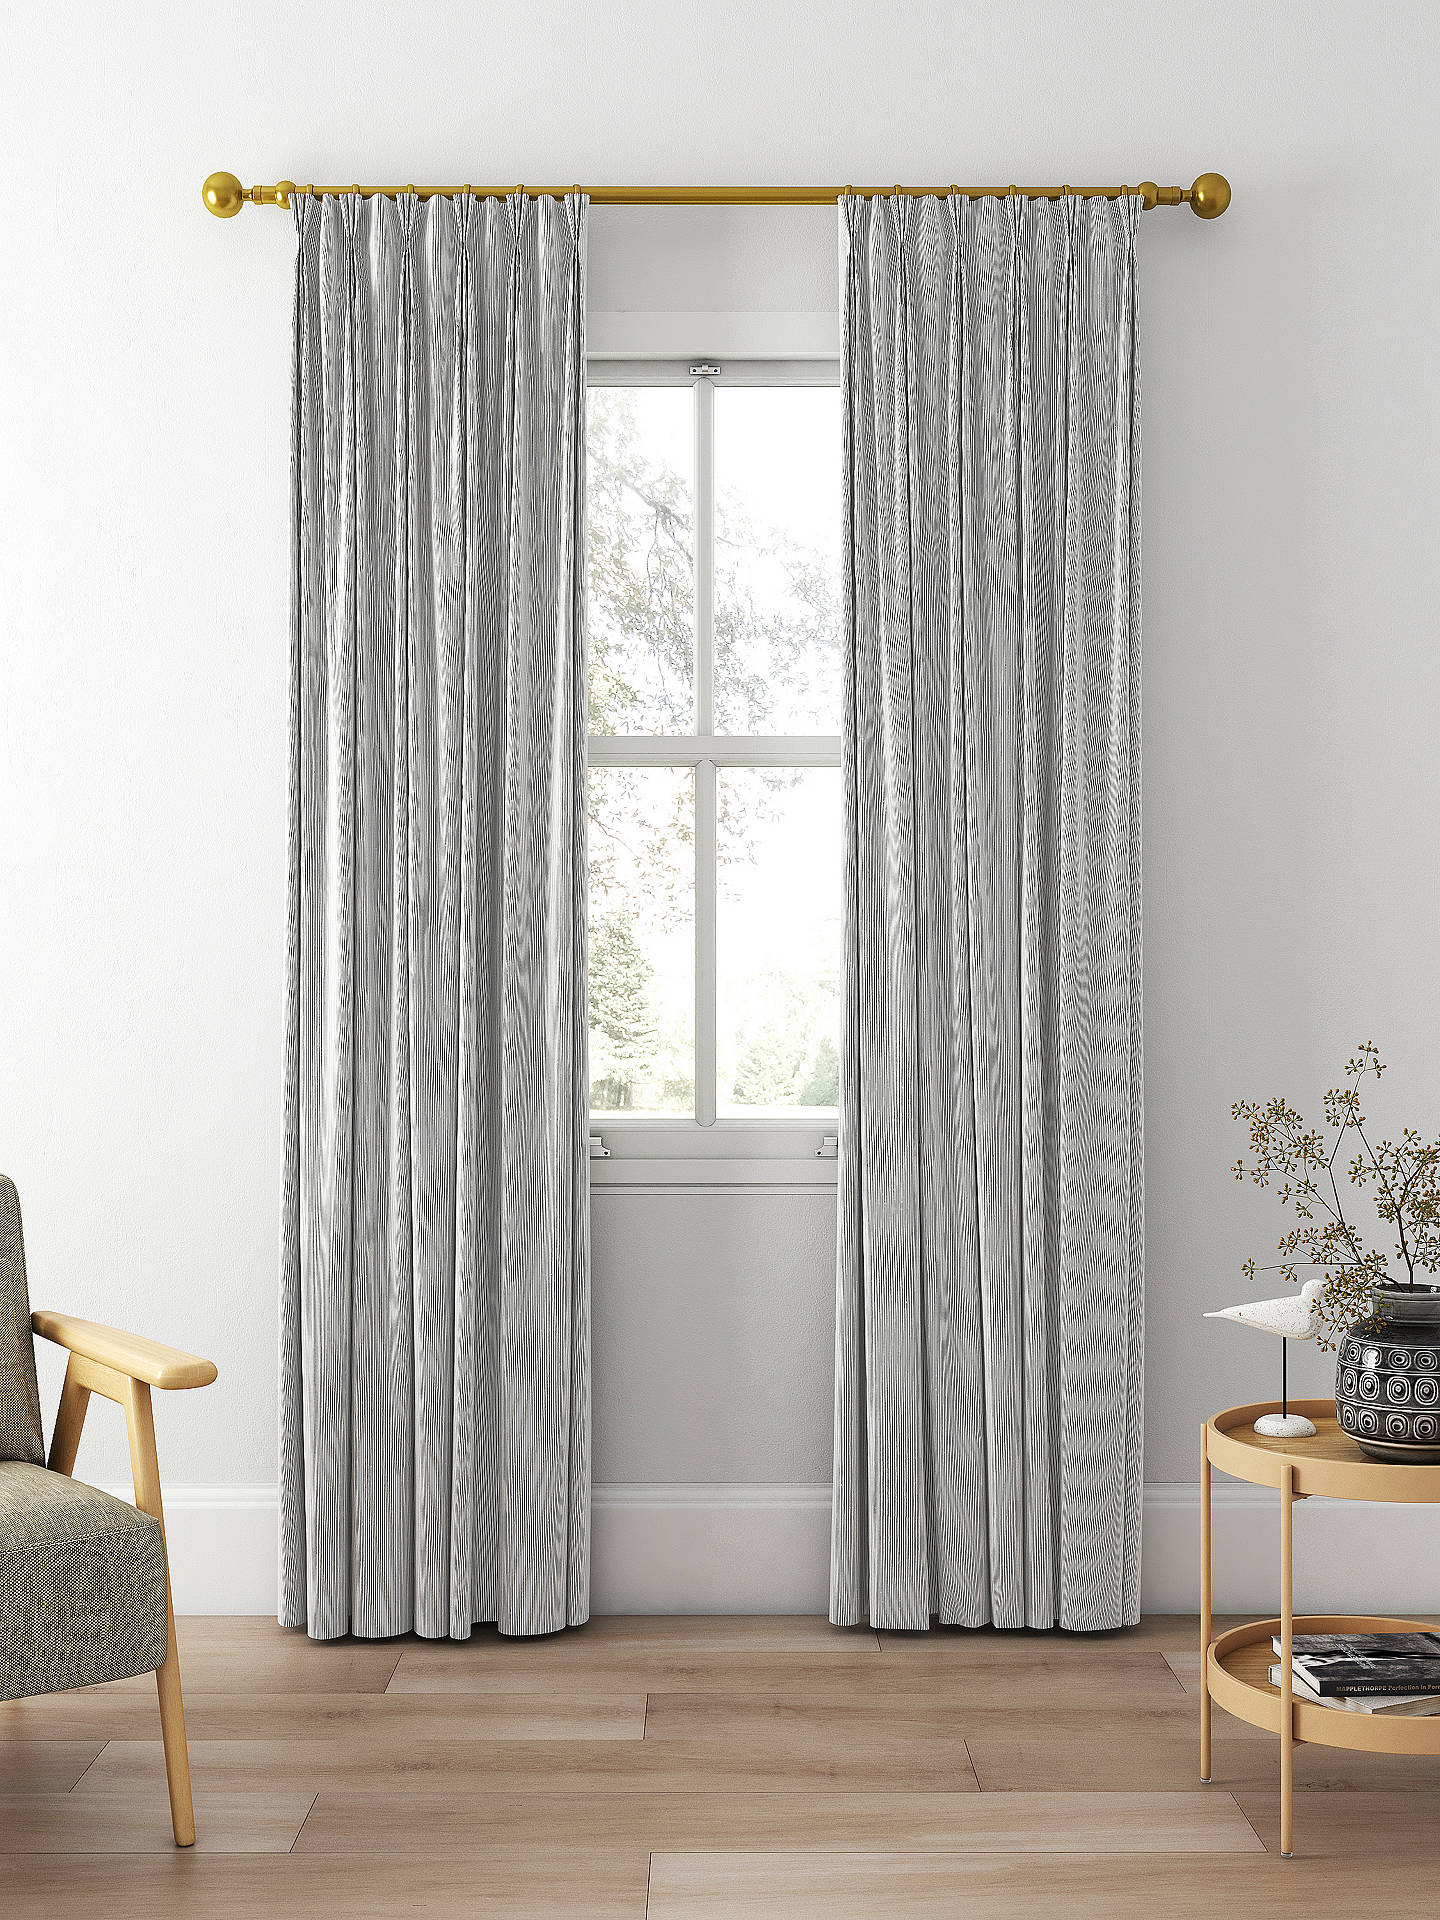 Clarke & Clarke Breton Made to Measure Curtains, Charcoal